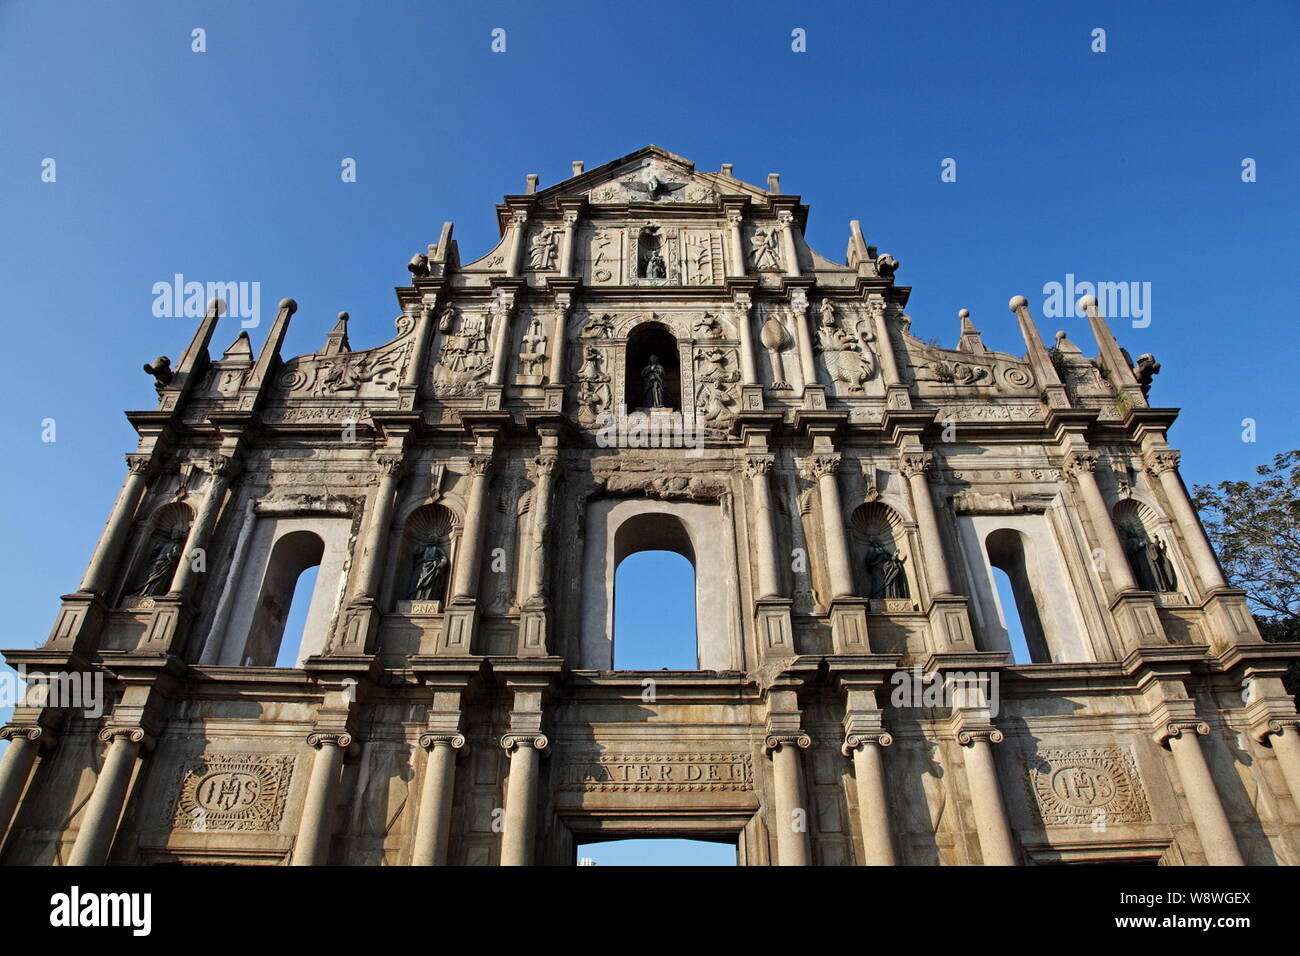 View of the Ruins of St. Pauls of Historic Centre of Macau in Macau, China, 4 December 2011. Stock Photo